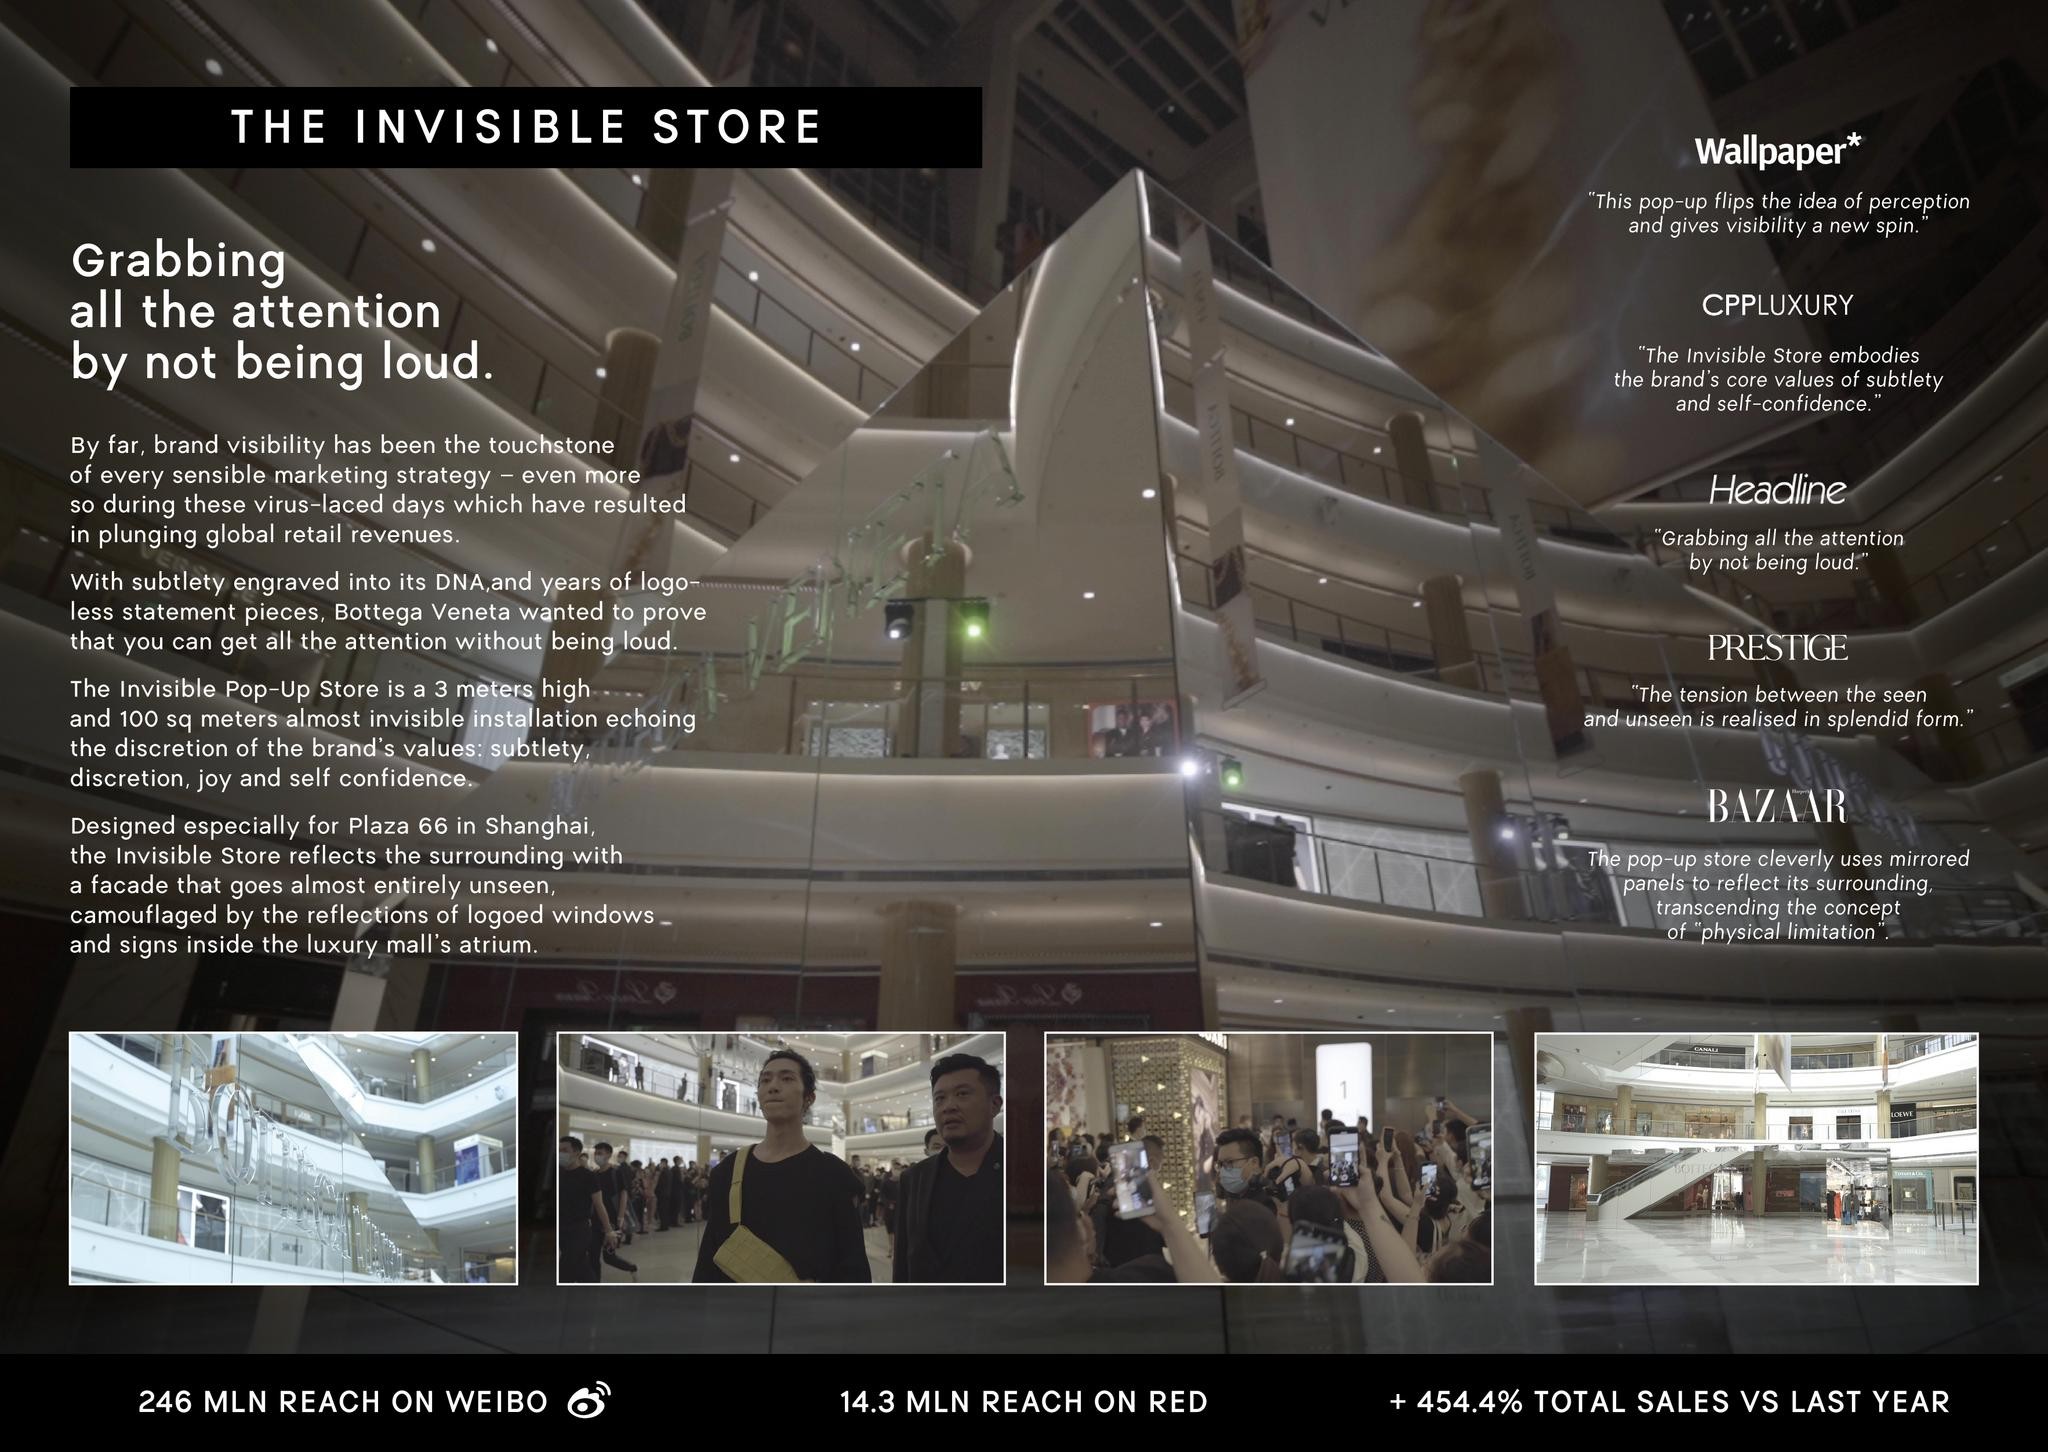 The Invisible Shop